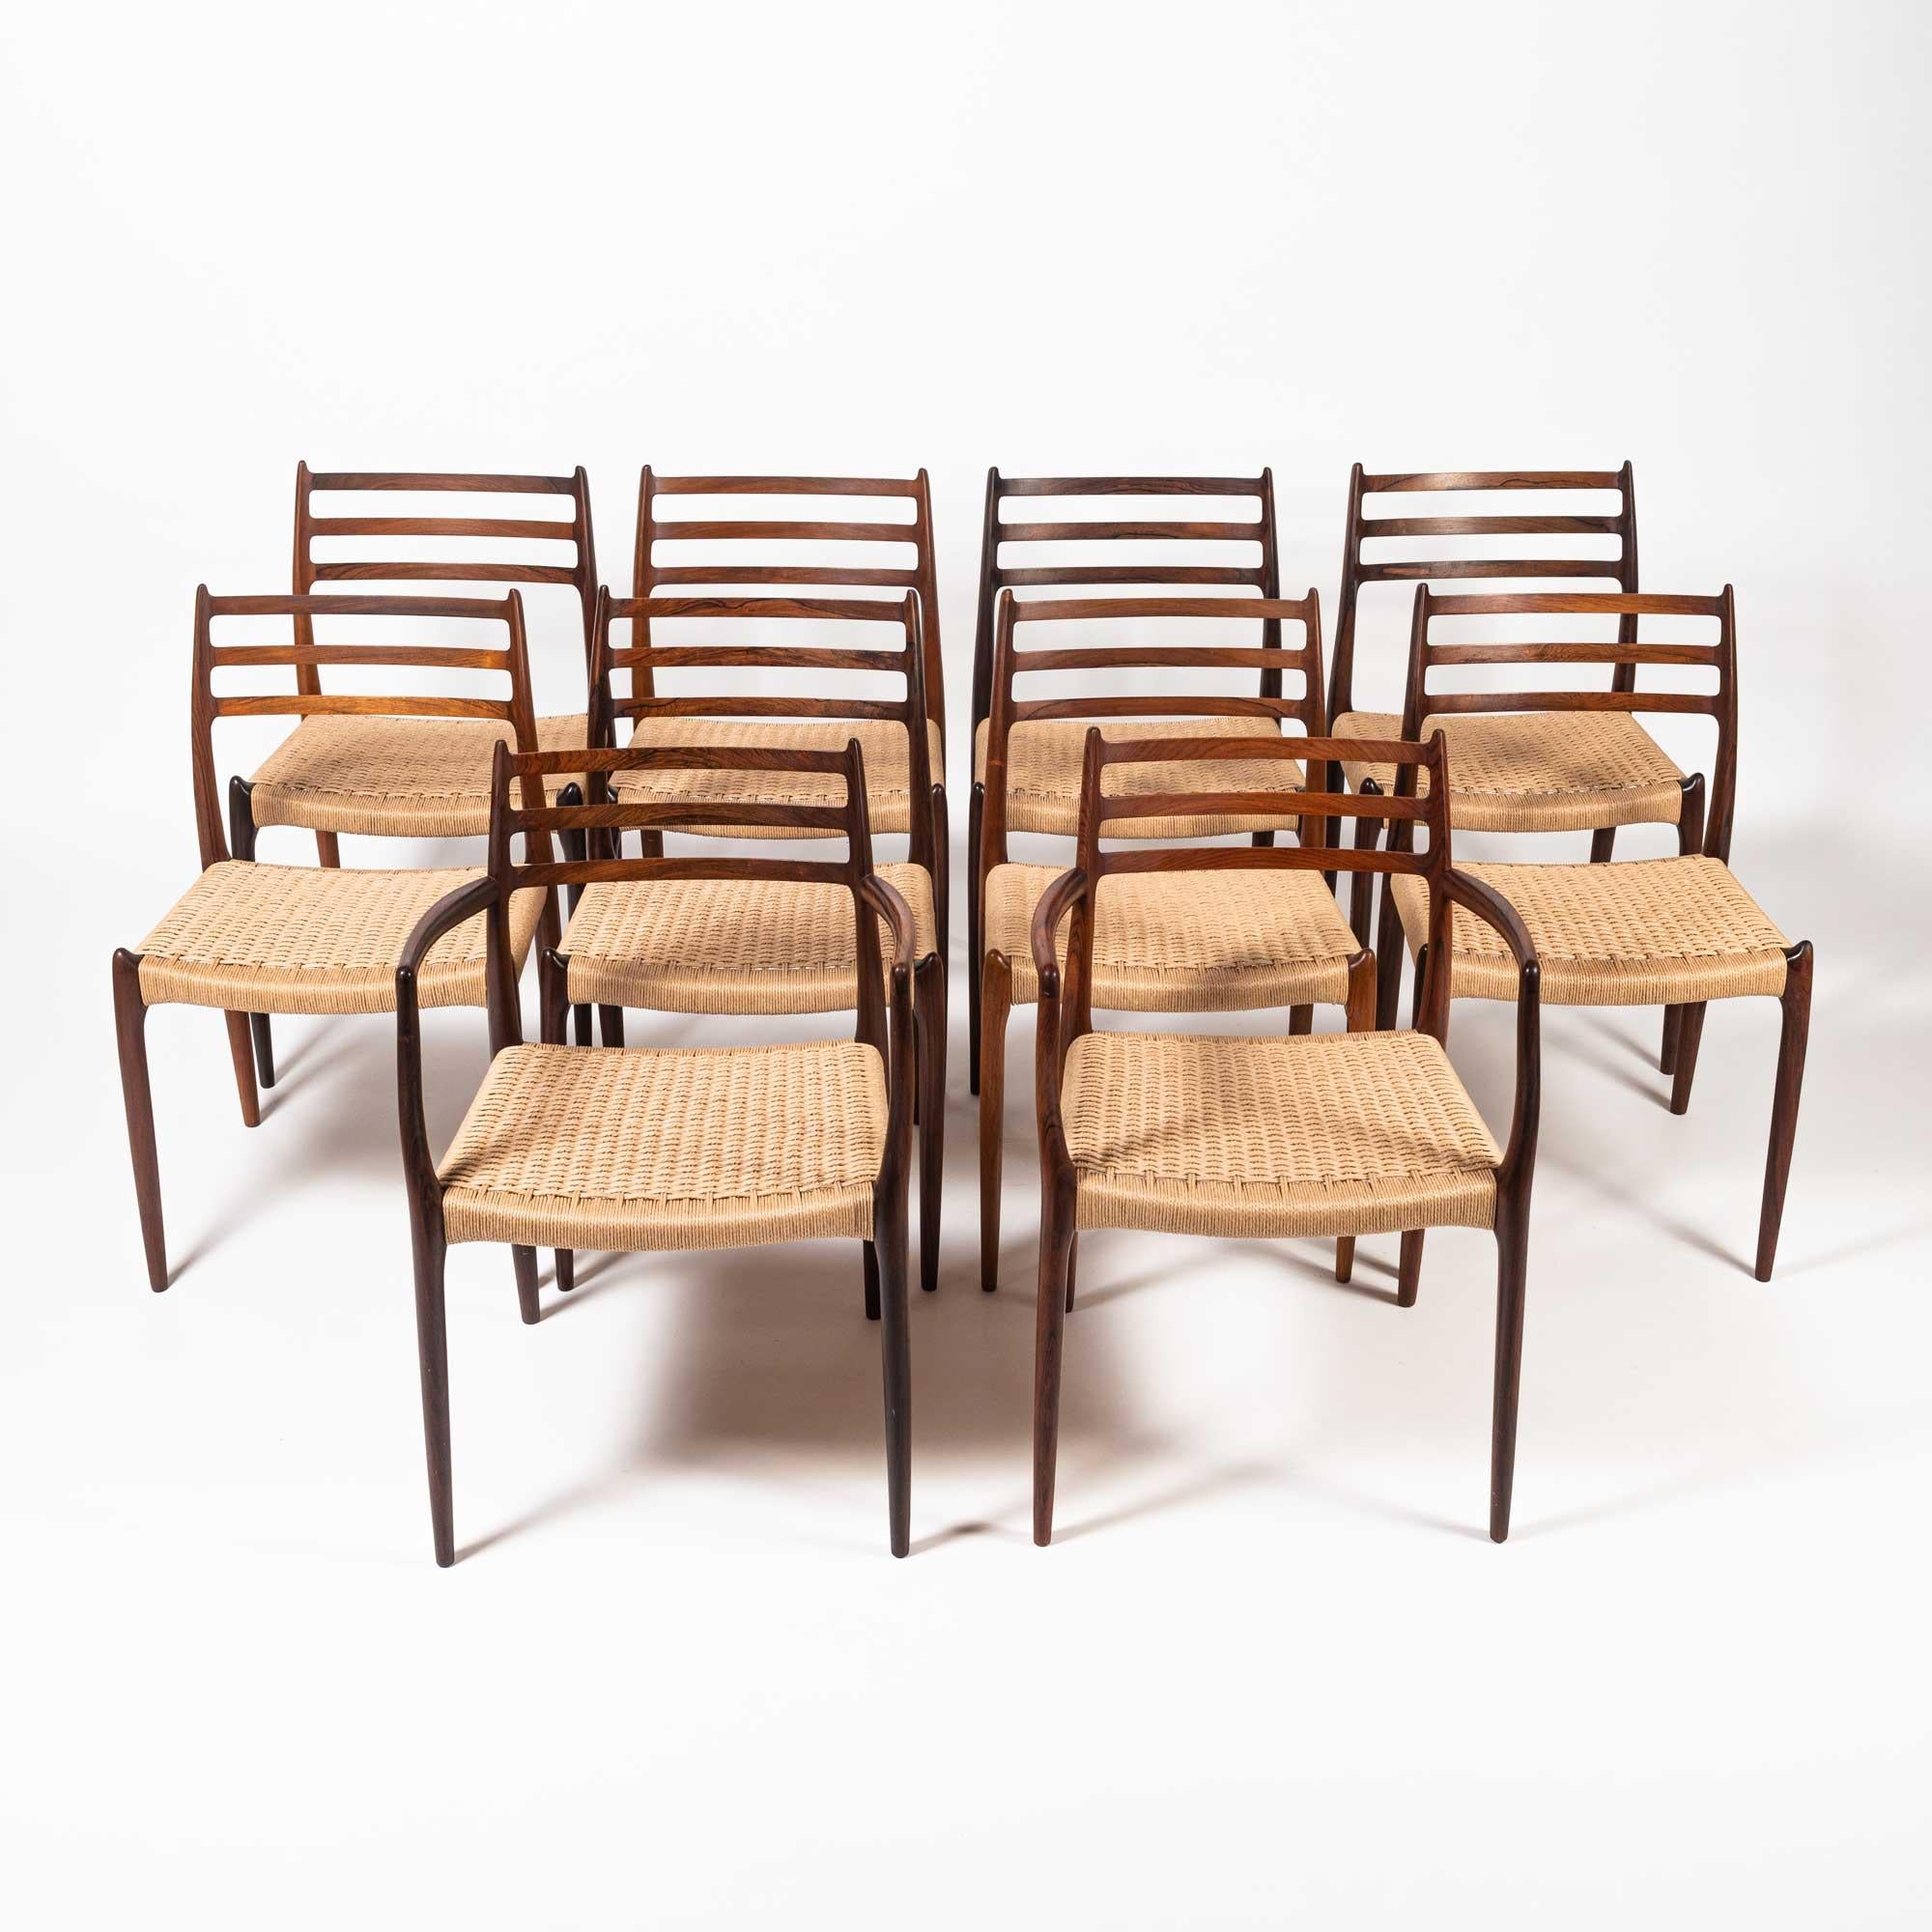 Rare and iconic set of 10 rosewood dining chairs designed by Niels Otto Moller for JL Møller Møbelfabrikin 1954. The set comprises of eight model #78 chairs and two model #62 carver armchairs. The set has been completely restored, with all new